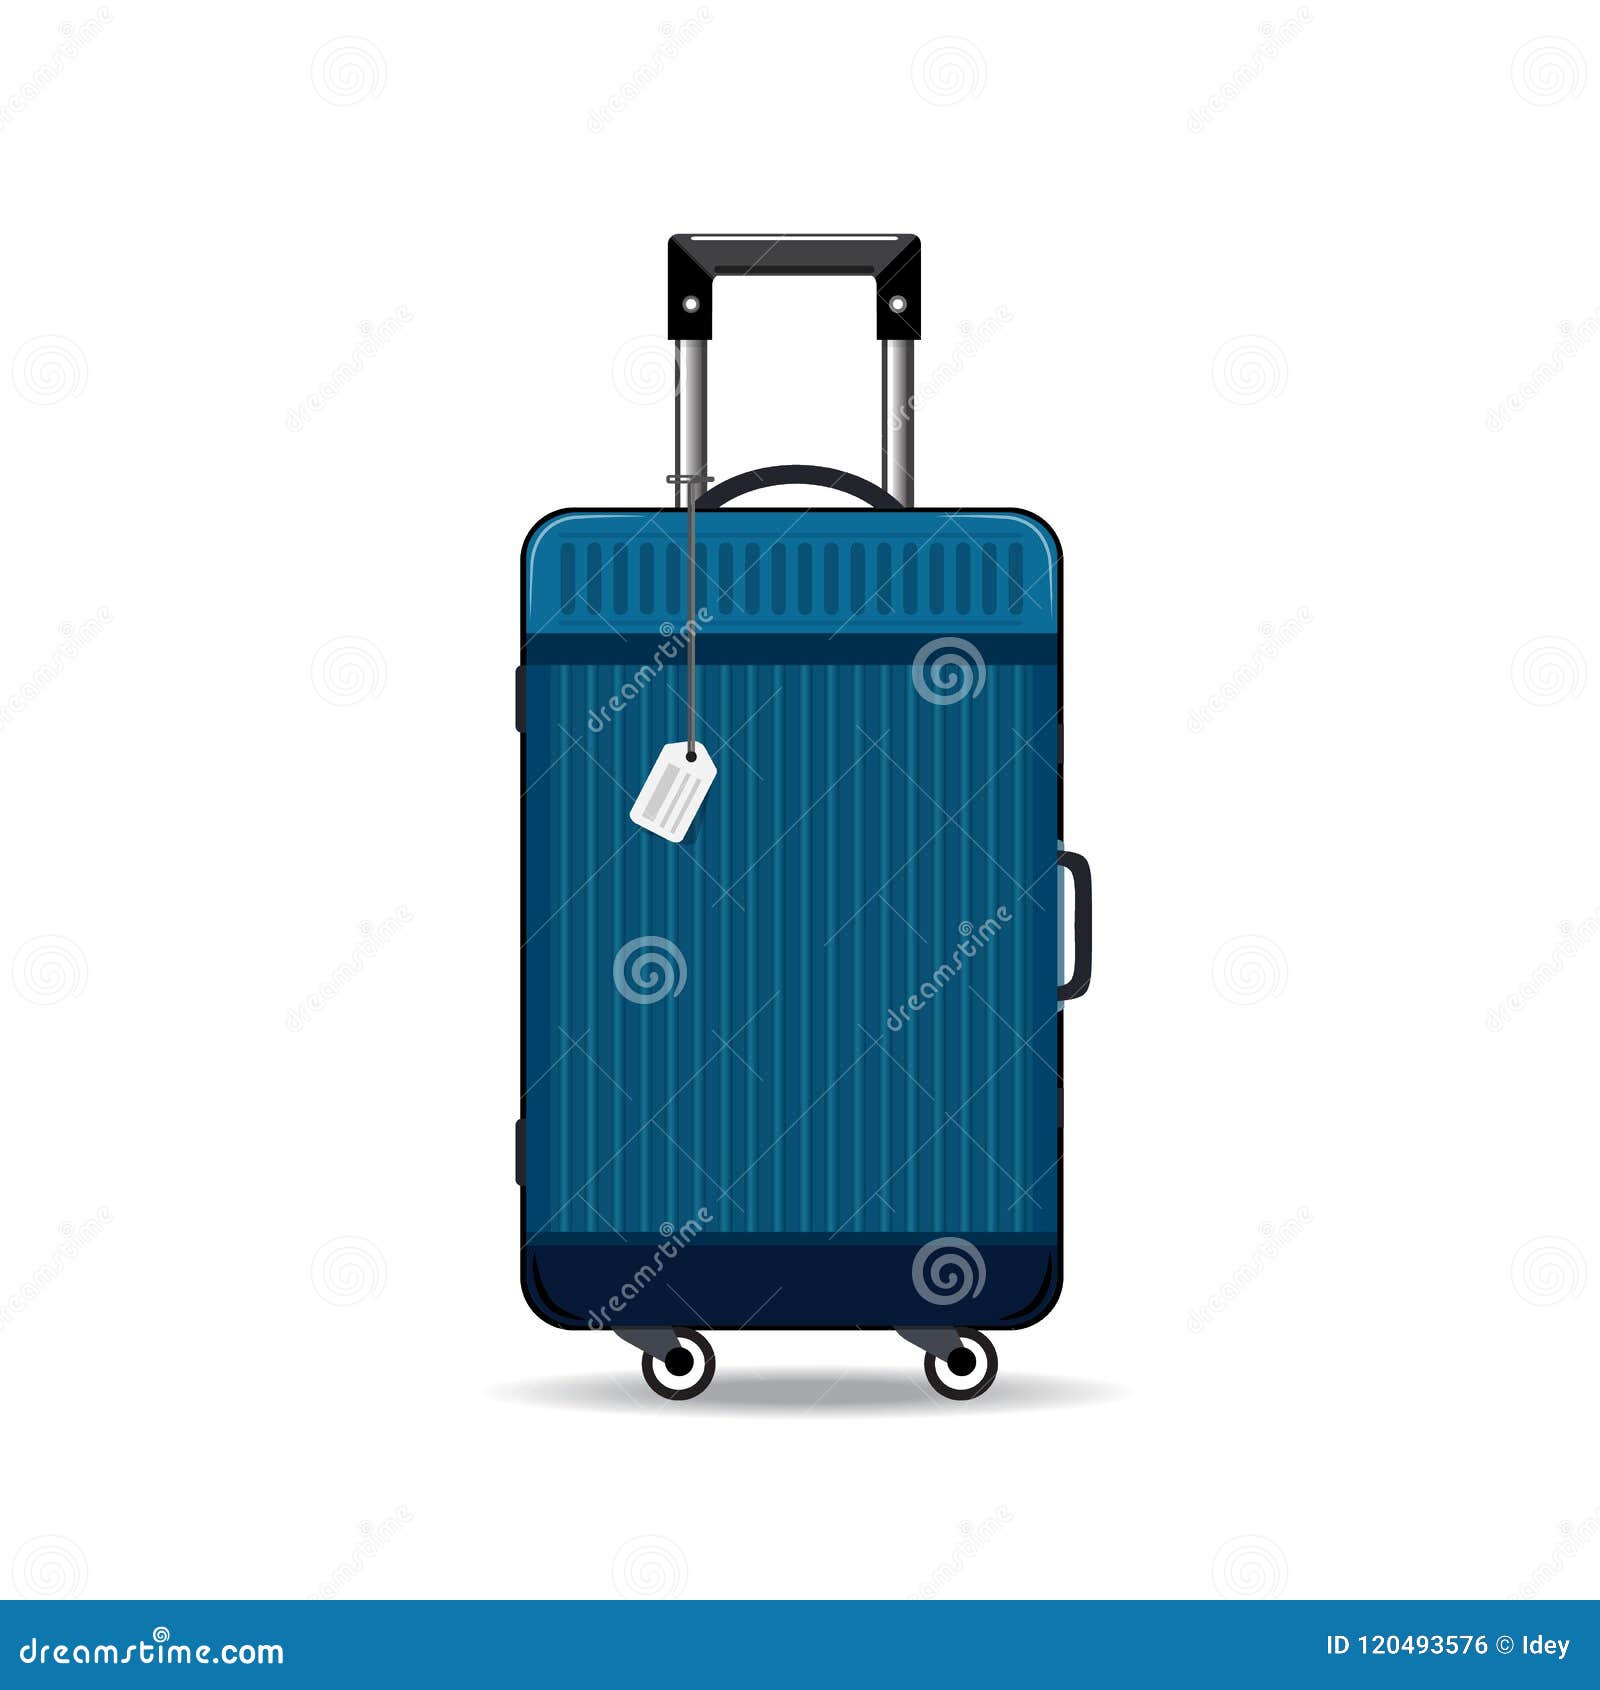 Suitcases Vector Drawing Vintage Travel Bag And Modern Suitcase On Wheels  The Concept Of Travel Vacation Road Trip Hand Drawn Illustration Of Luggage  Black Lines Isolated On A White Background Stock Illustration 